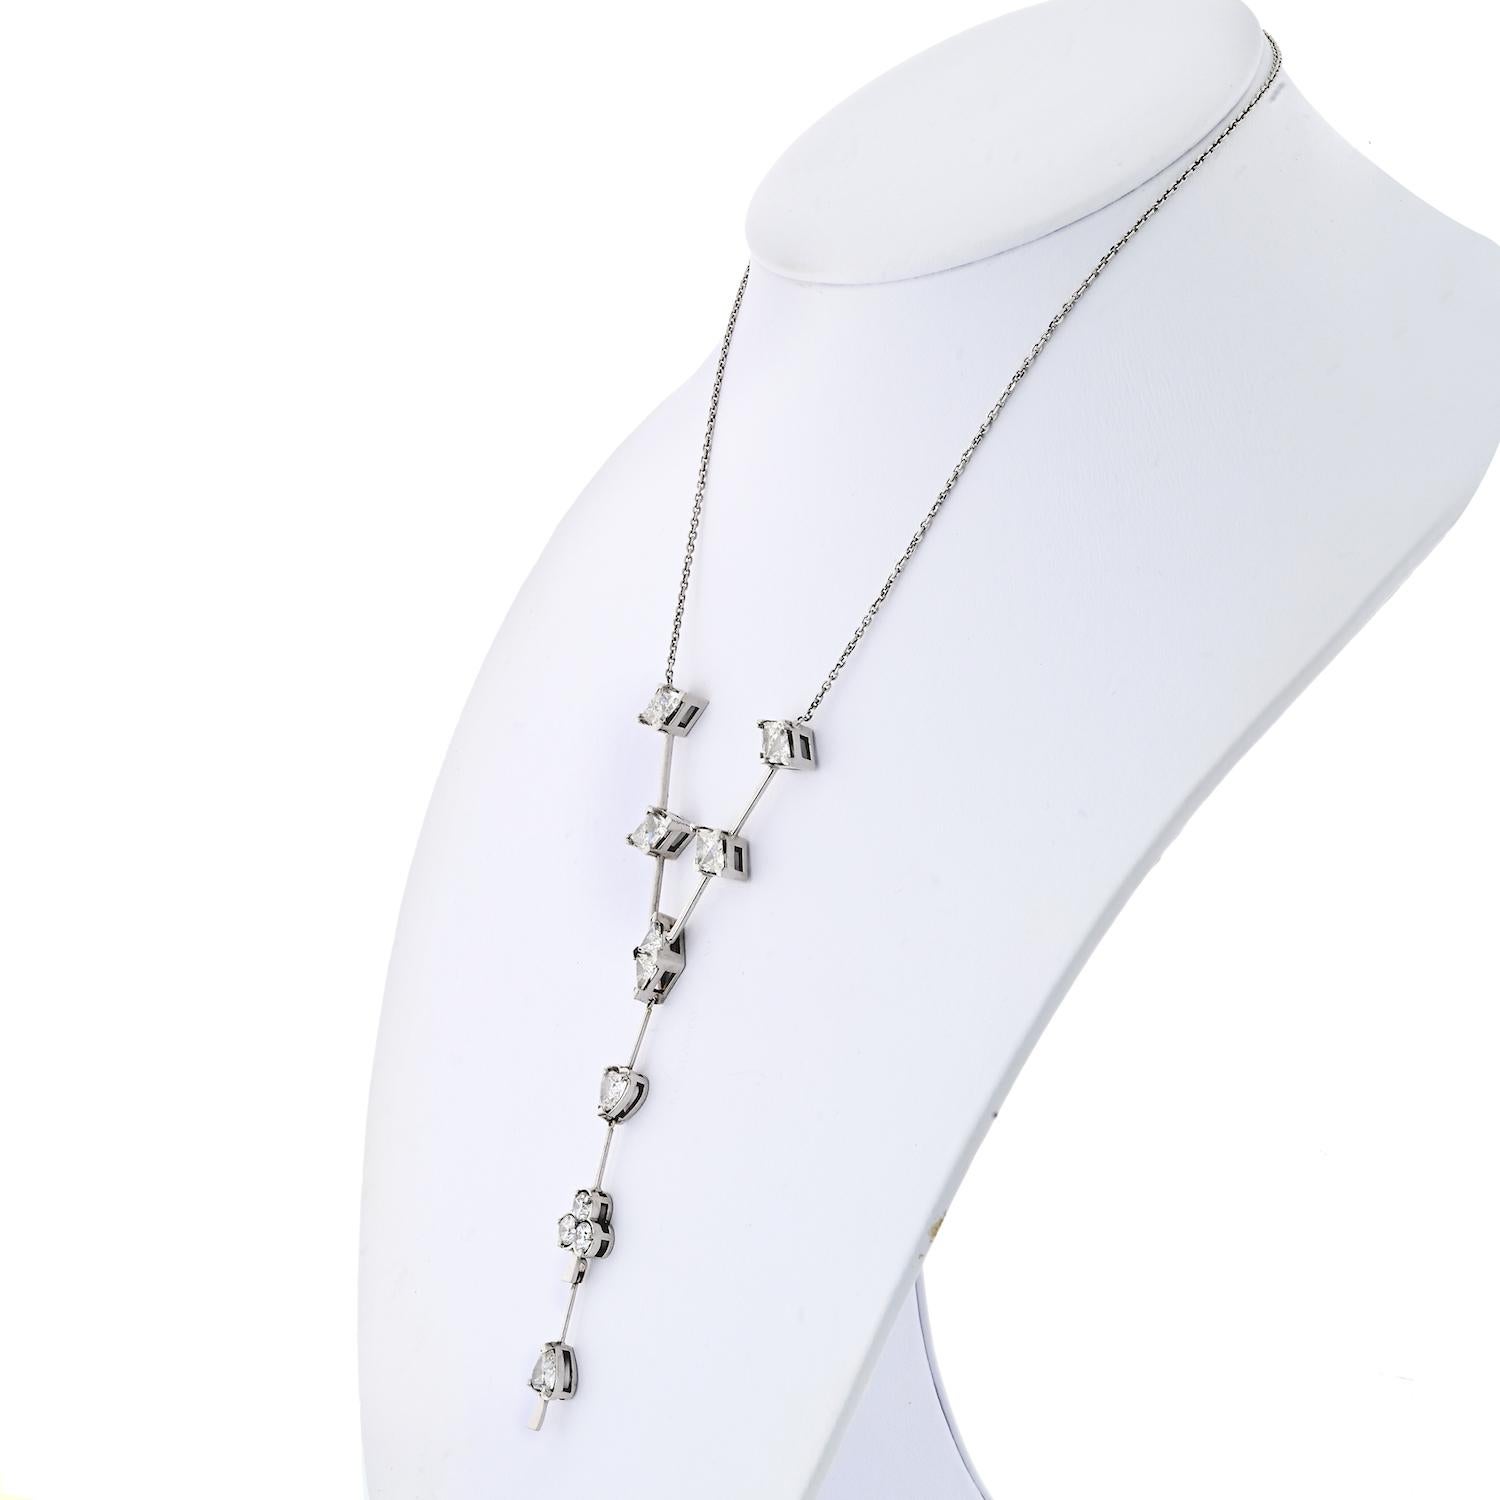 This diamond chain necklace is a stunning piece of jewelry that is sure to turn heads. Crafted from high-quality 14k white gold, this necklace features an impressive 10.00cttw of sparkling diamonds. What makes this necklace truly unique is the way